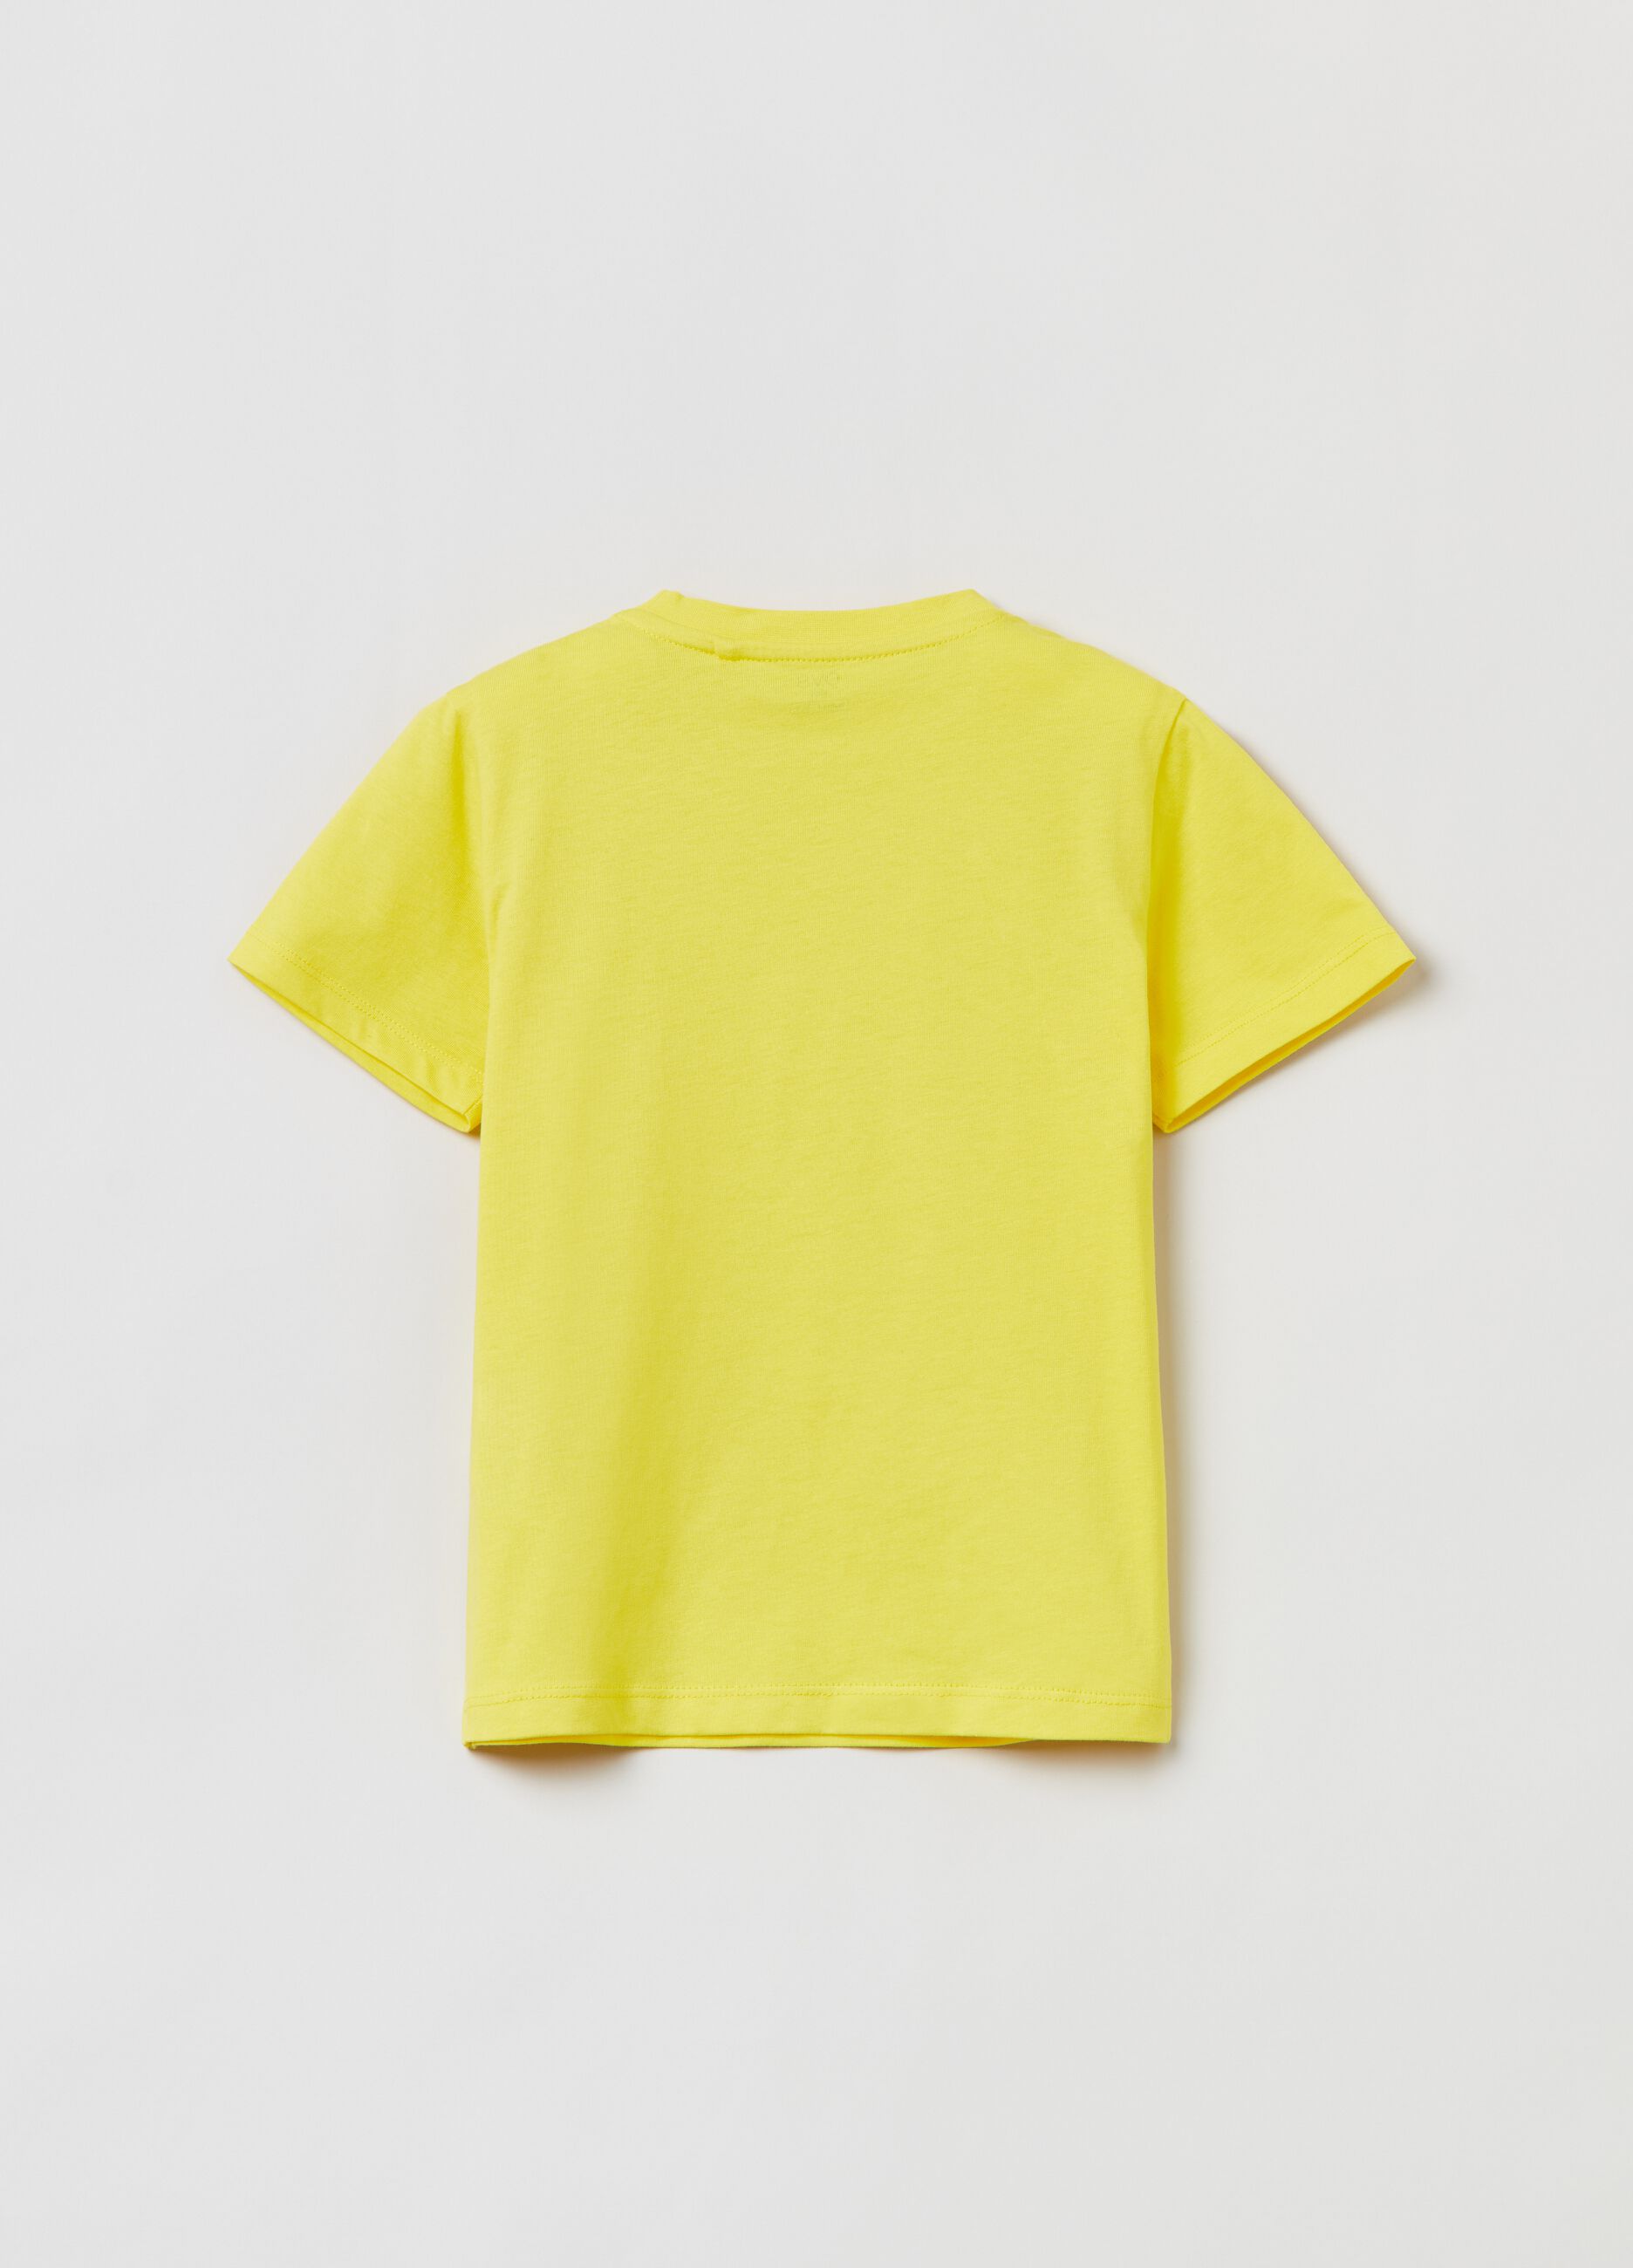 Fitness T-shirt in solid colour cotton